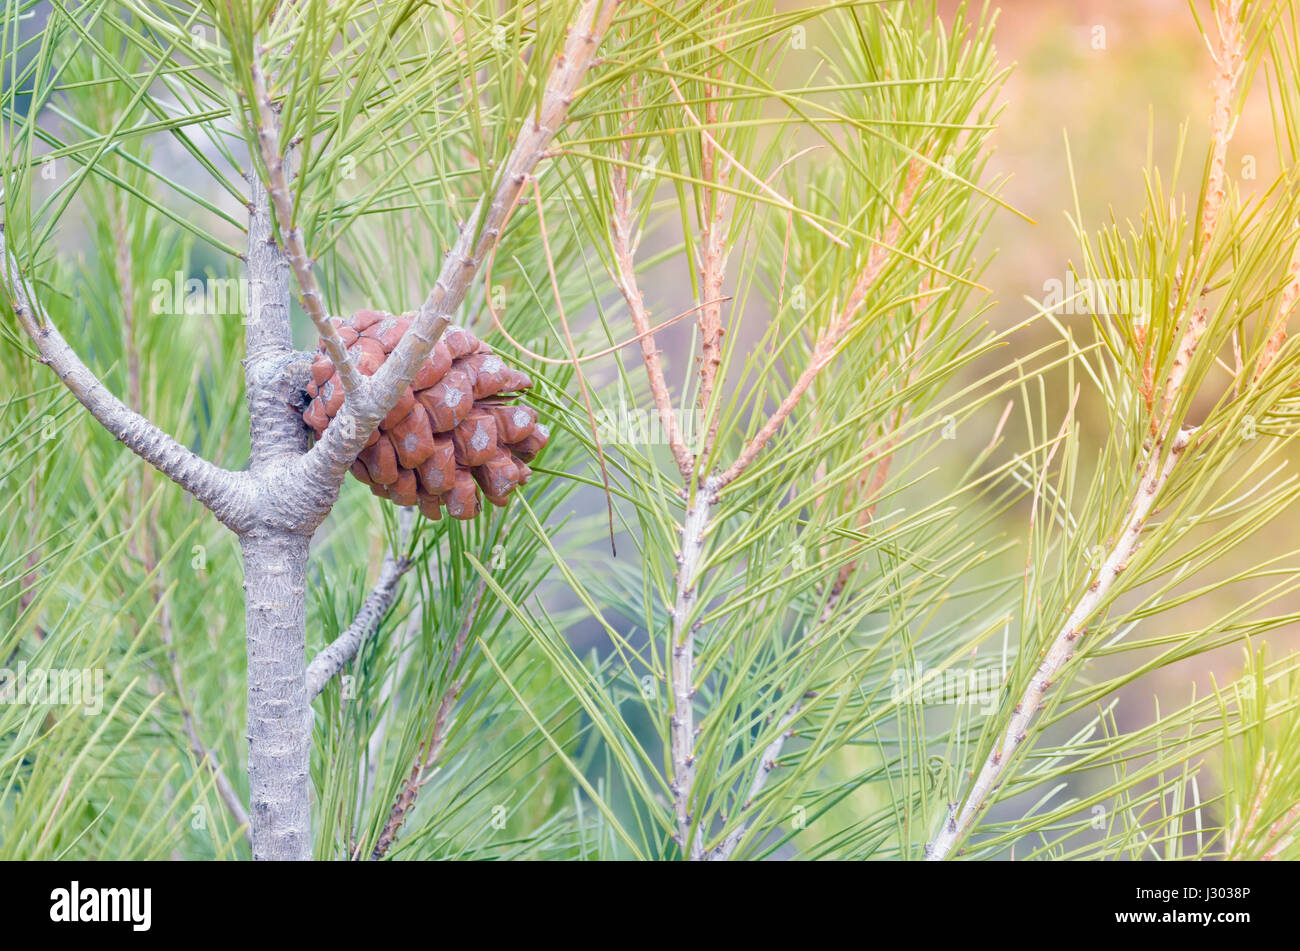 Pine cone of - Stone pine (the botanical name is Pinus Pinea) -. Rounded woody fruit of a pine tree with seeds inside (edible pine nuts). Stock Photo